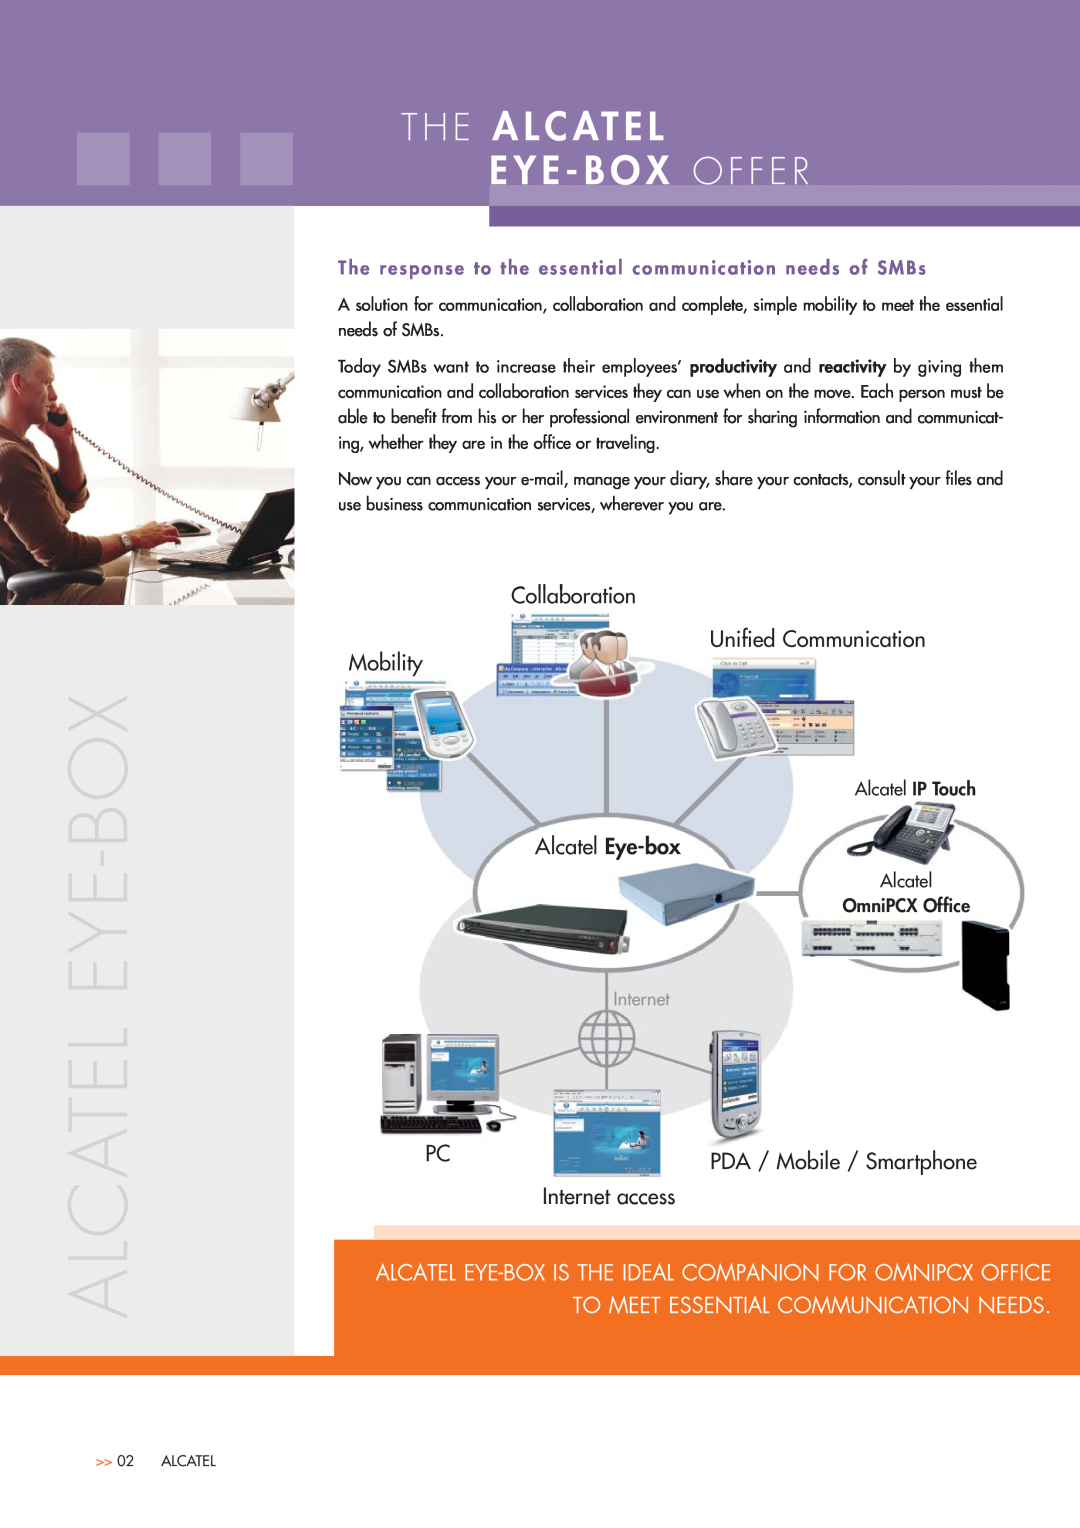 Alcatel-Lucent Eye-Box The A L C At E L E Y E - B O X Offer, Collaboration Unified Communication Mobility, Alcatel Eye-box 